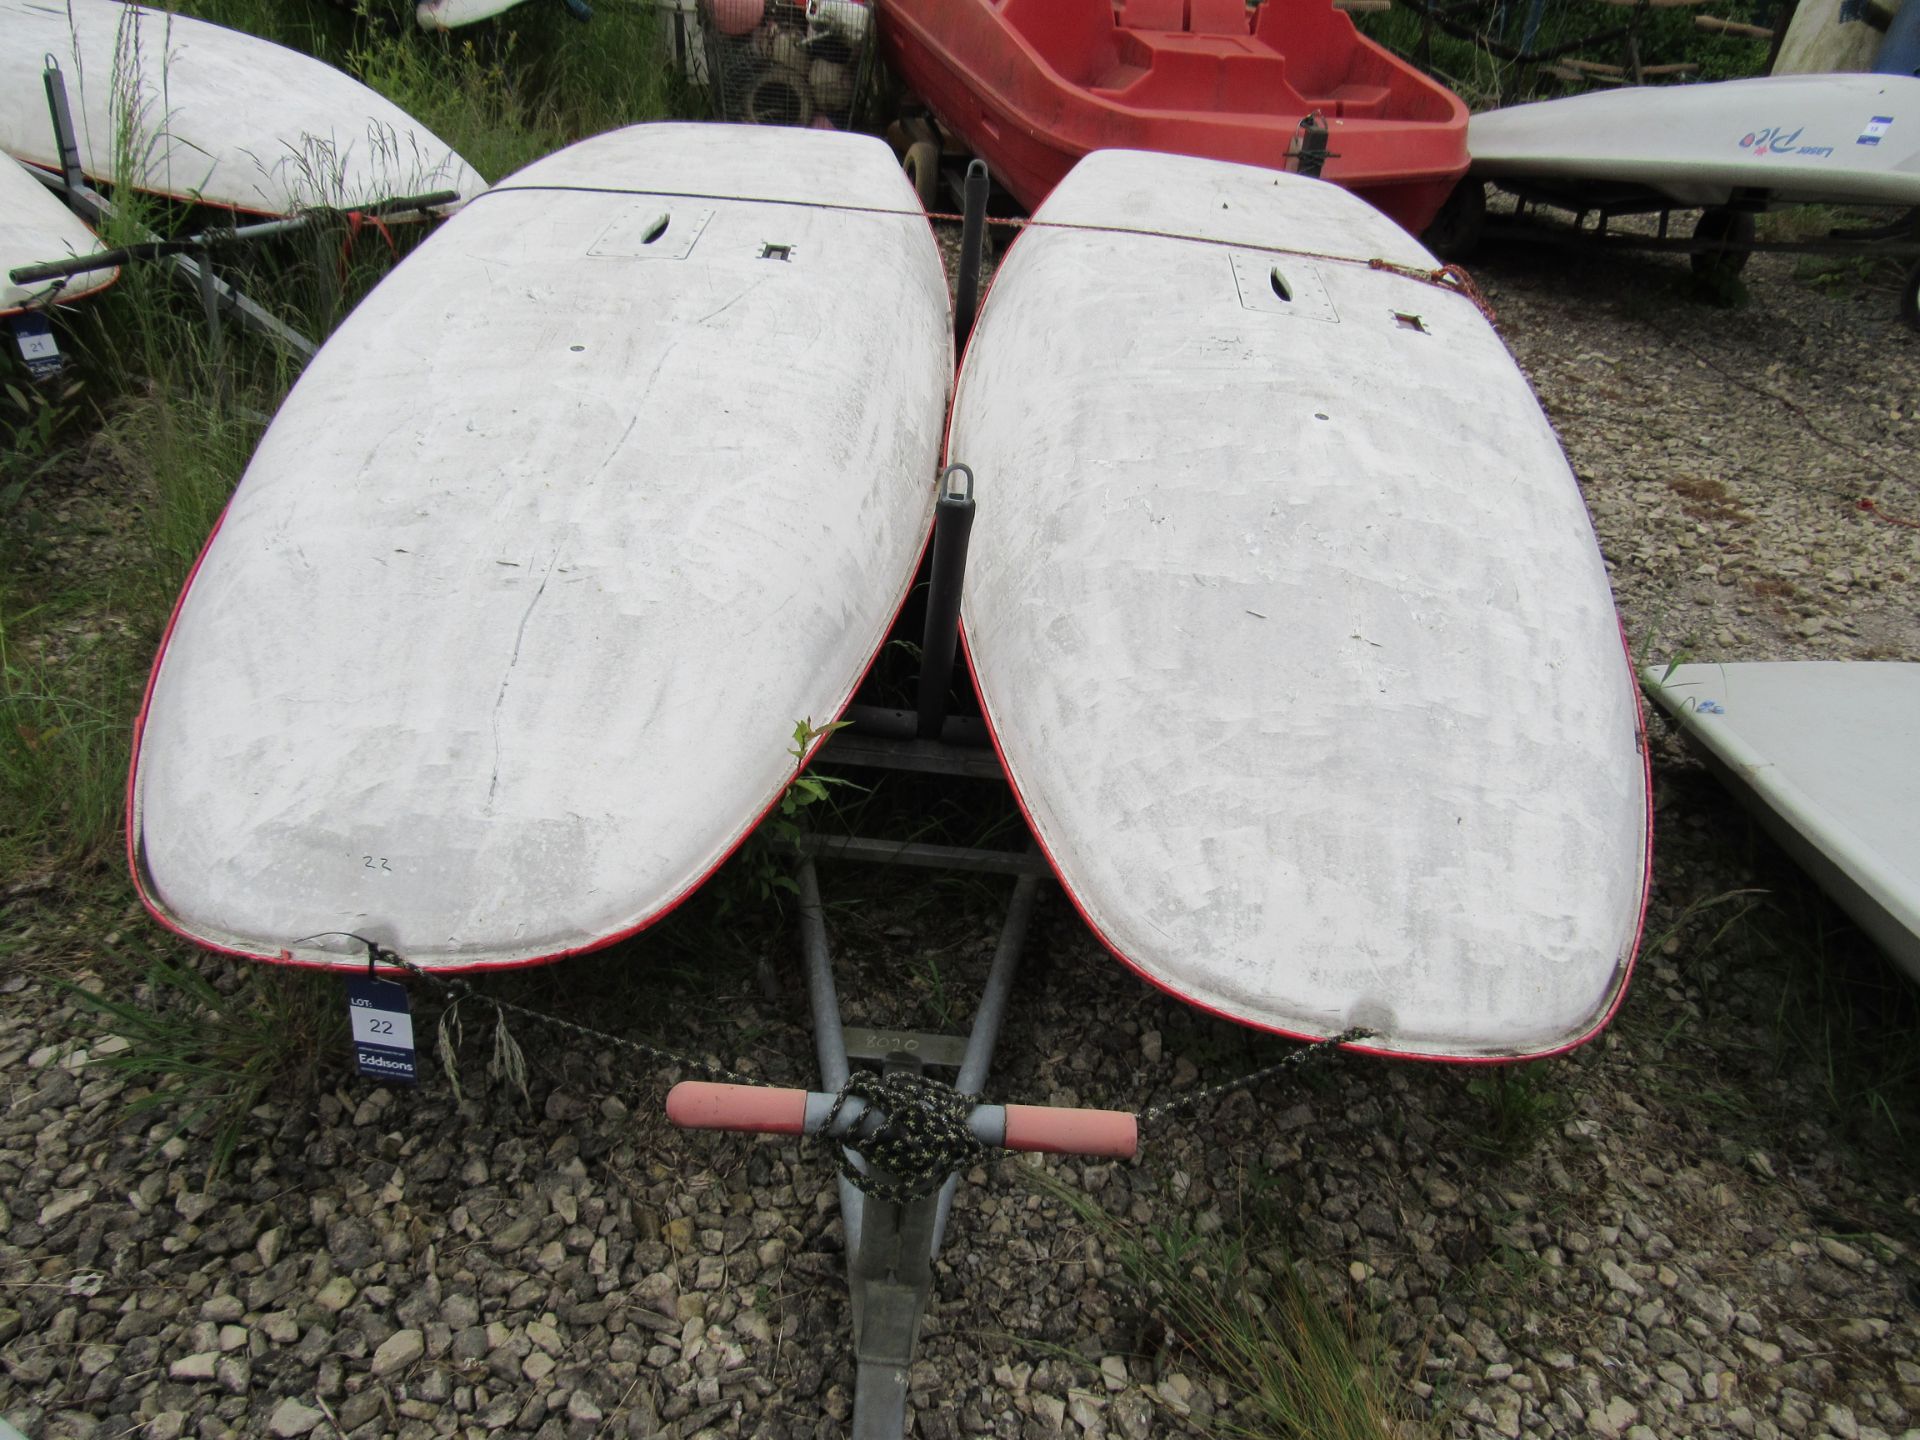 2 TOPPER BOATS with Trailer Asset Number W8020 - Image 2 of 3